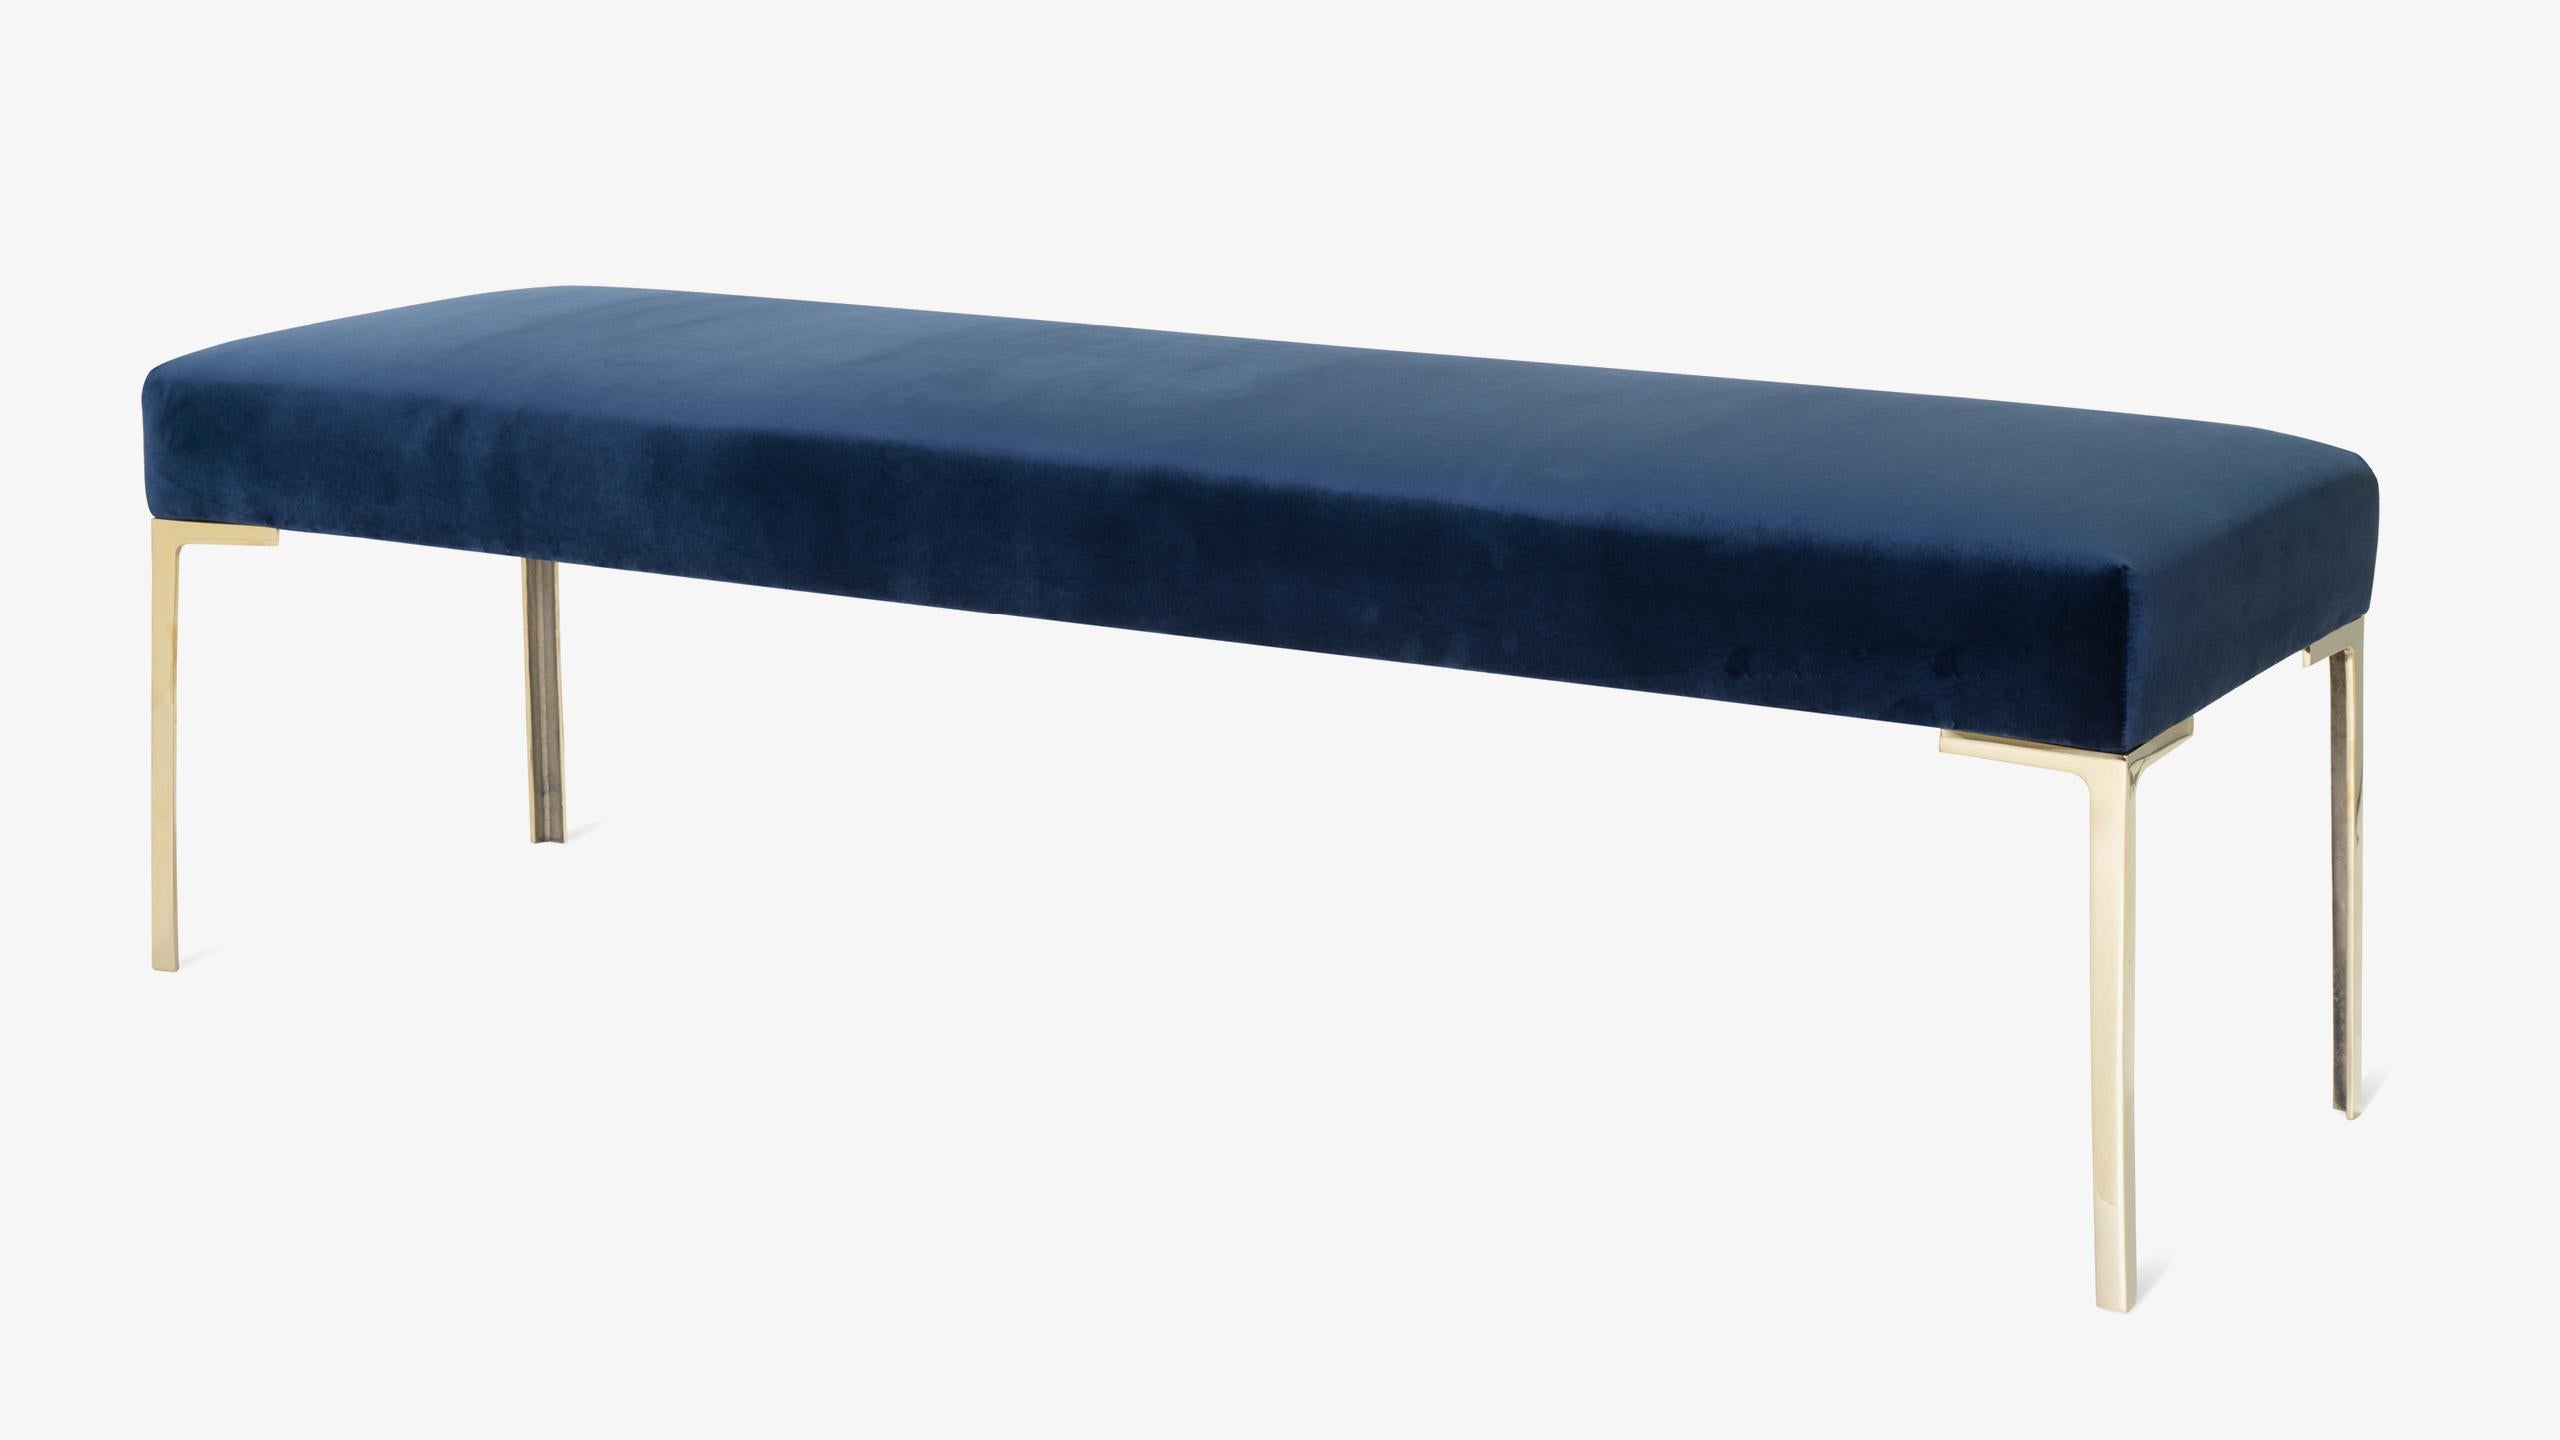 Designed by Montage, the Astor Bench 60